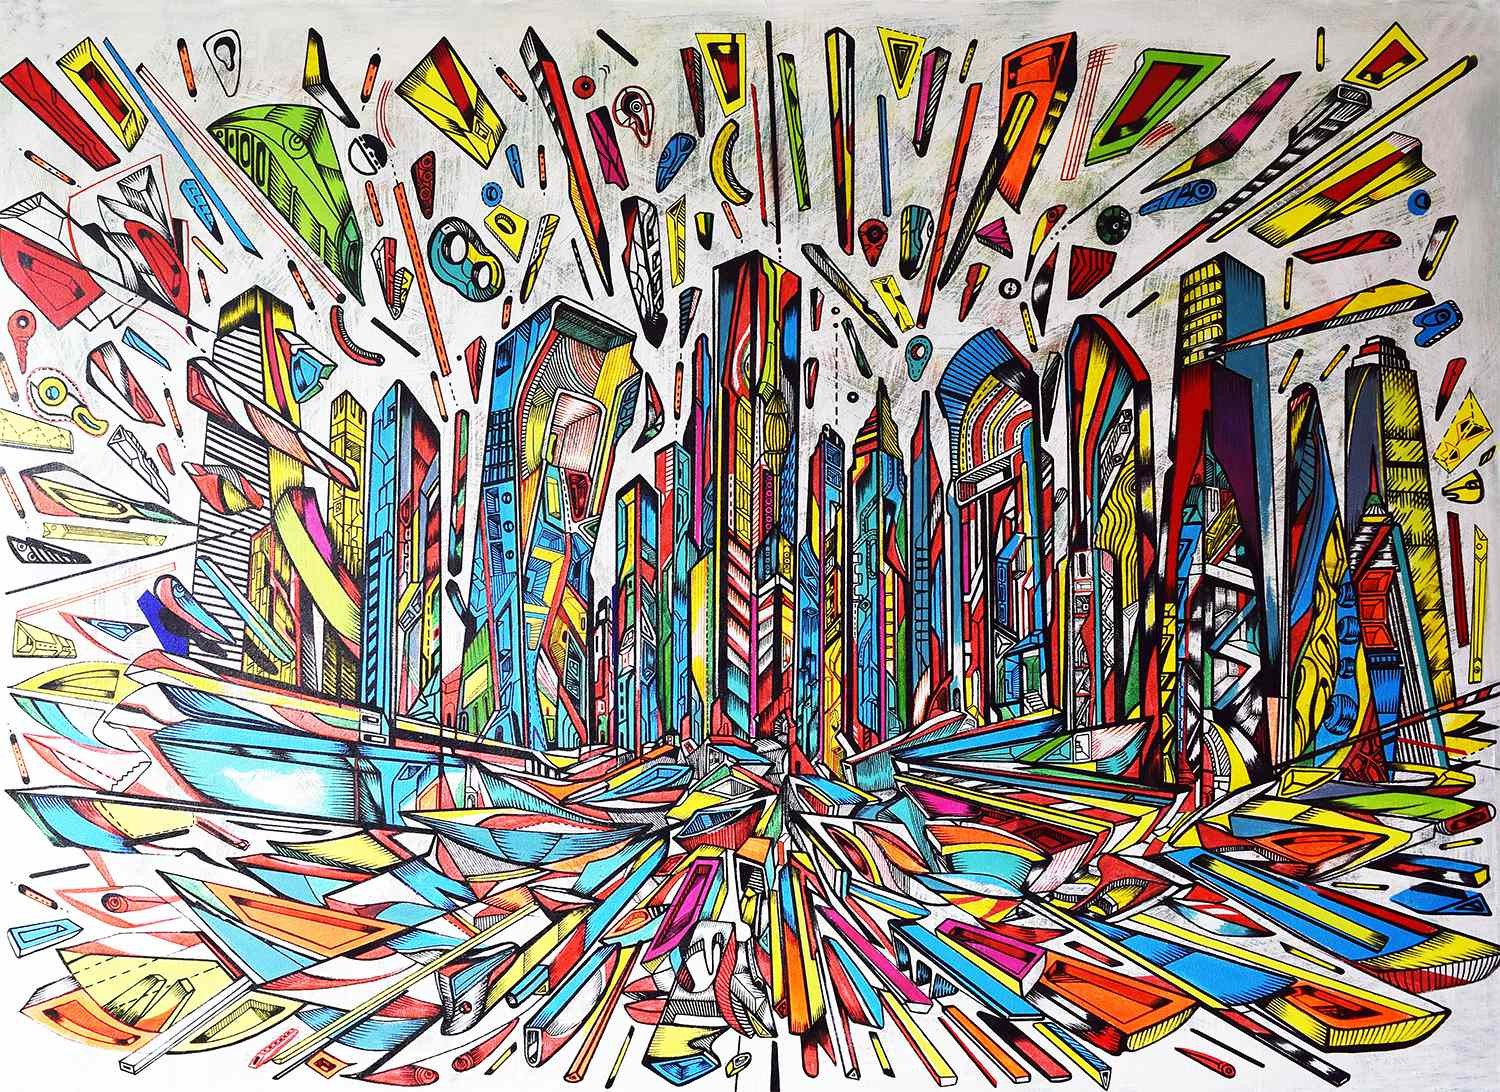 The Flow is a futuristic and abstract city painting by Marko Gavrilovic from City paintings series.